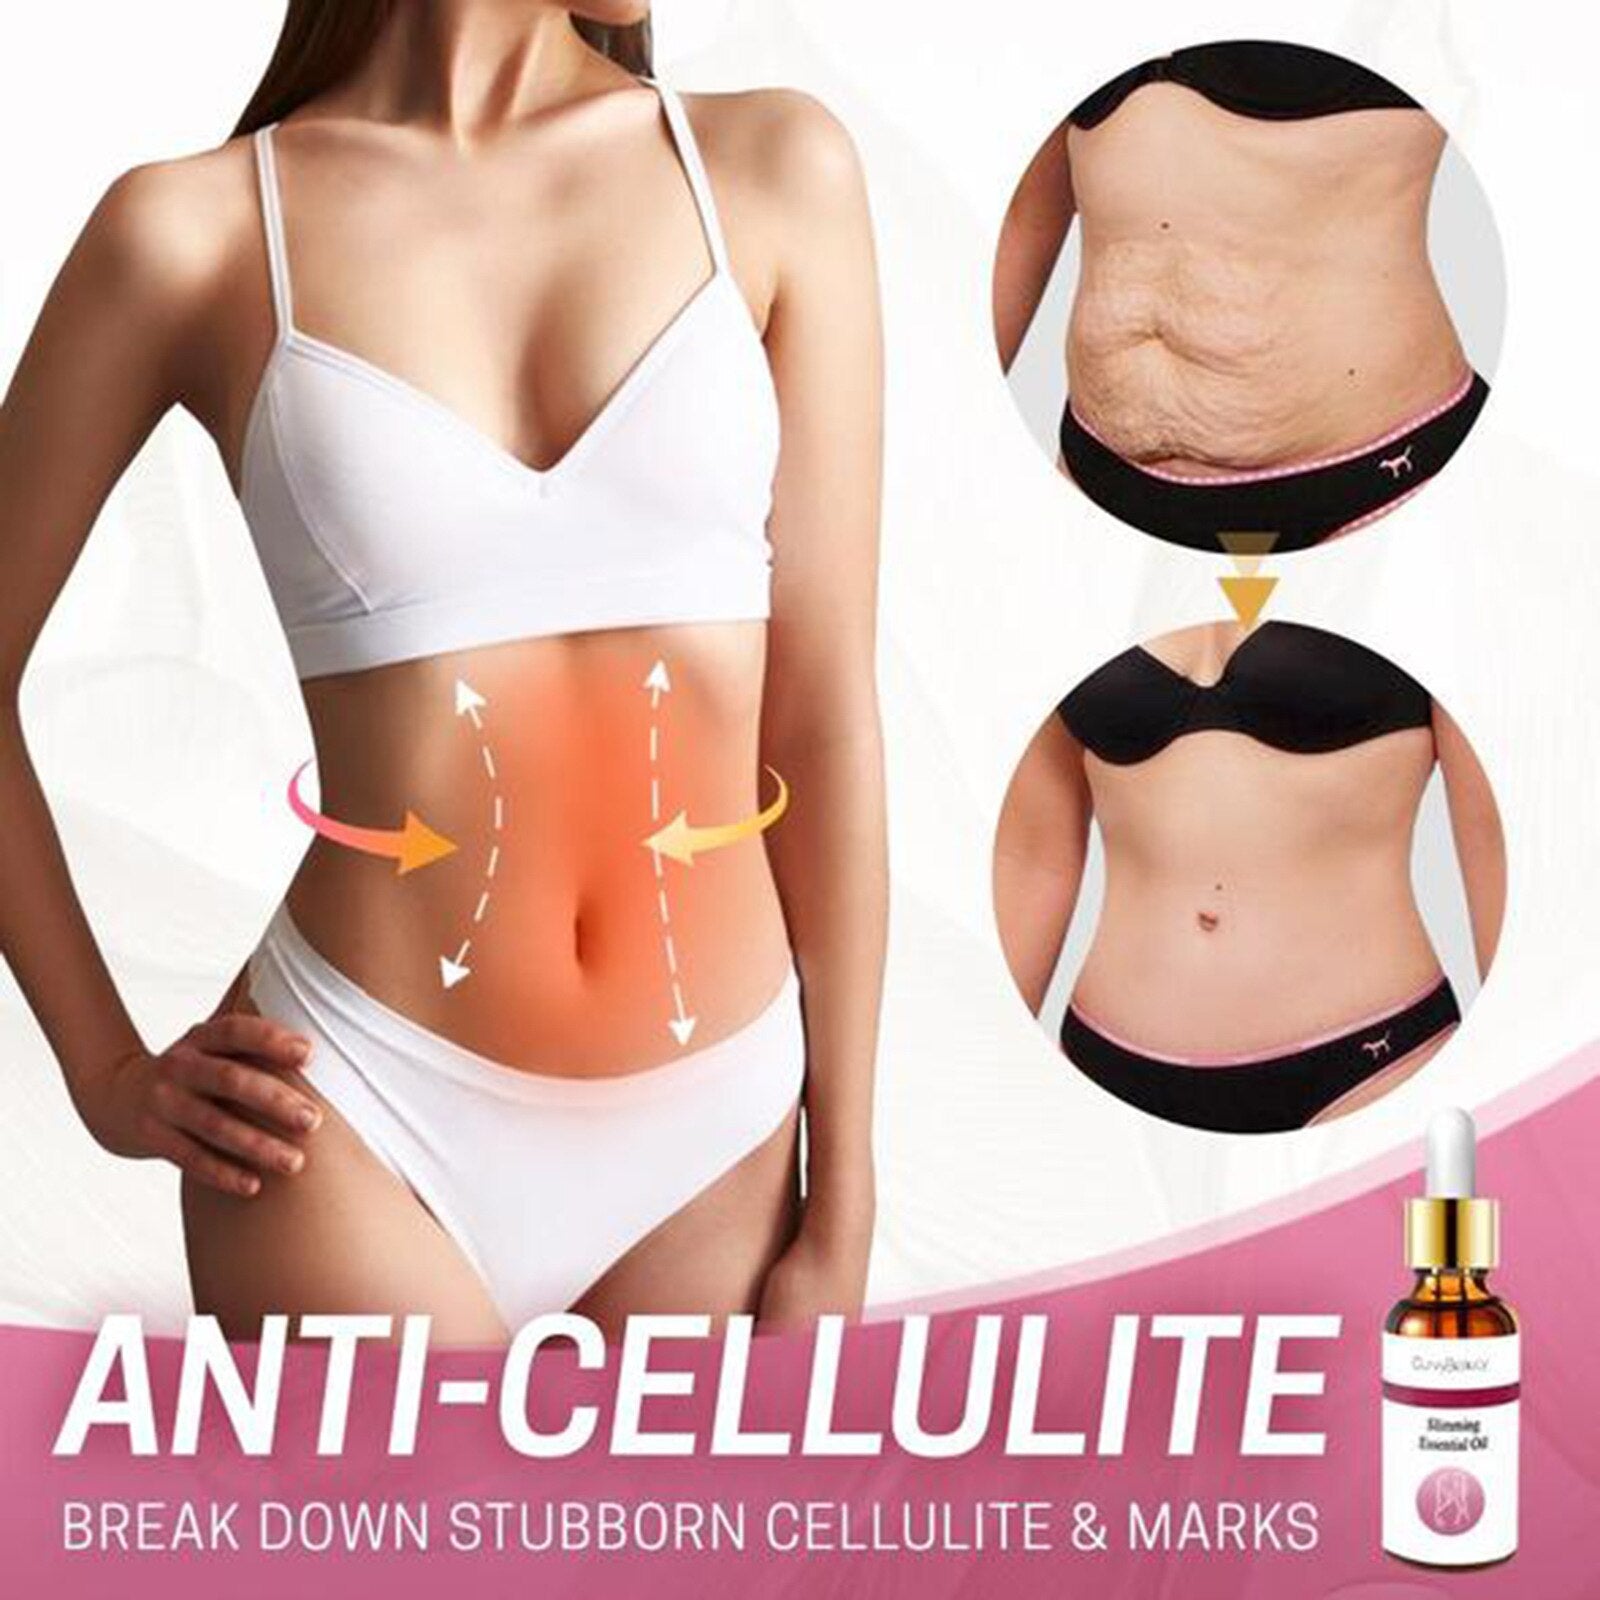 CurvyBeauty Belly Slimming Massage Oil